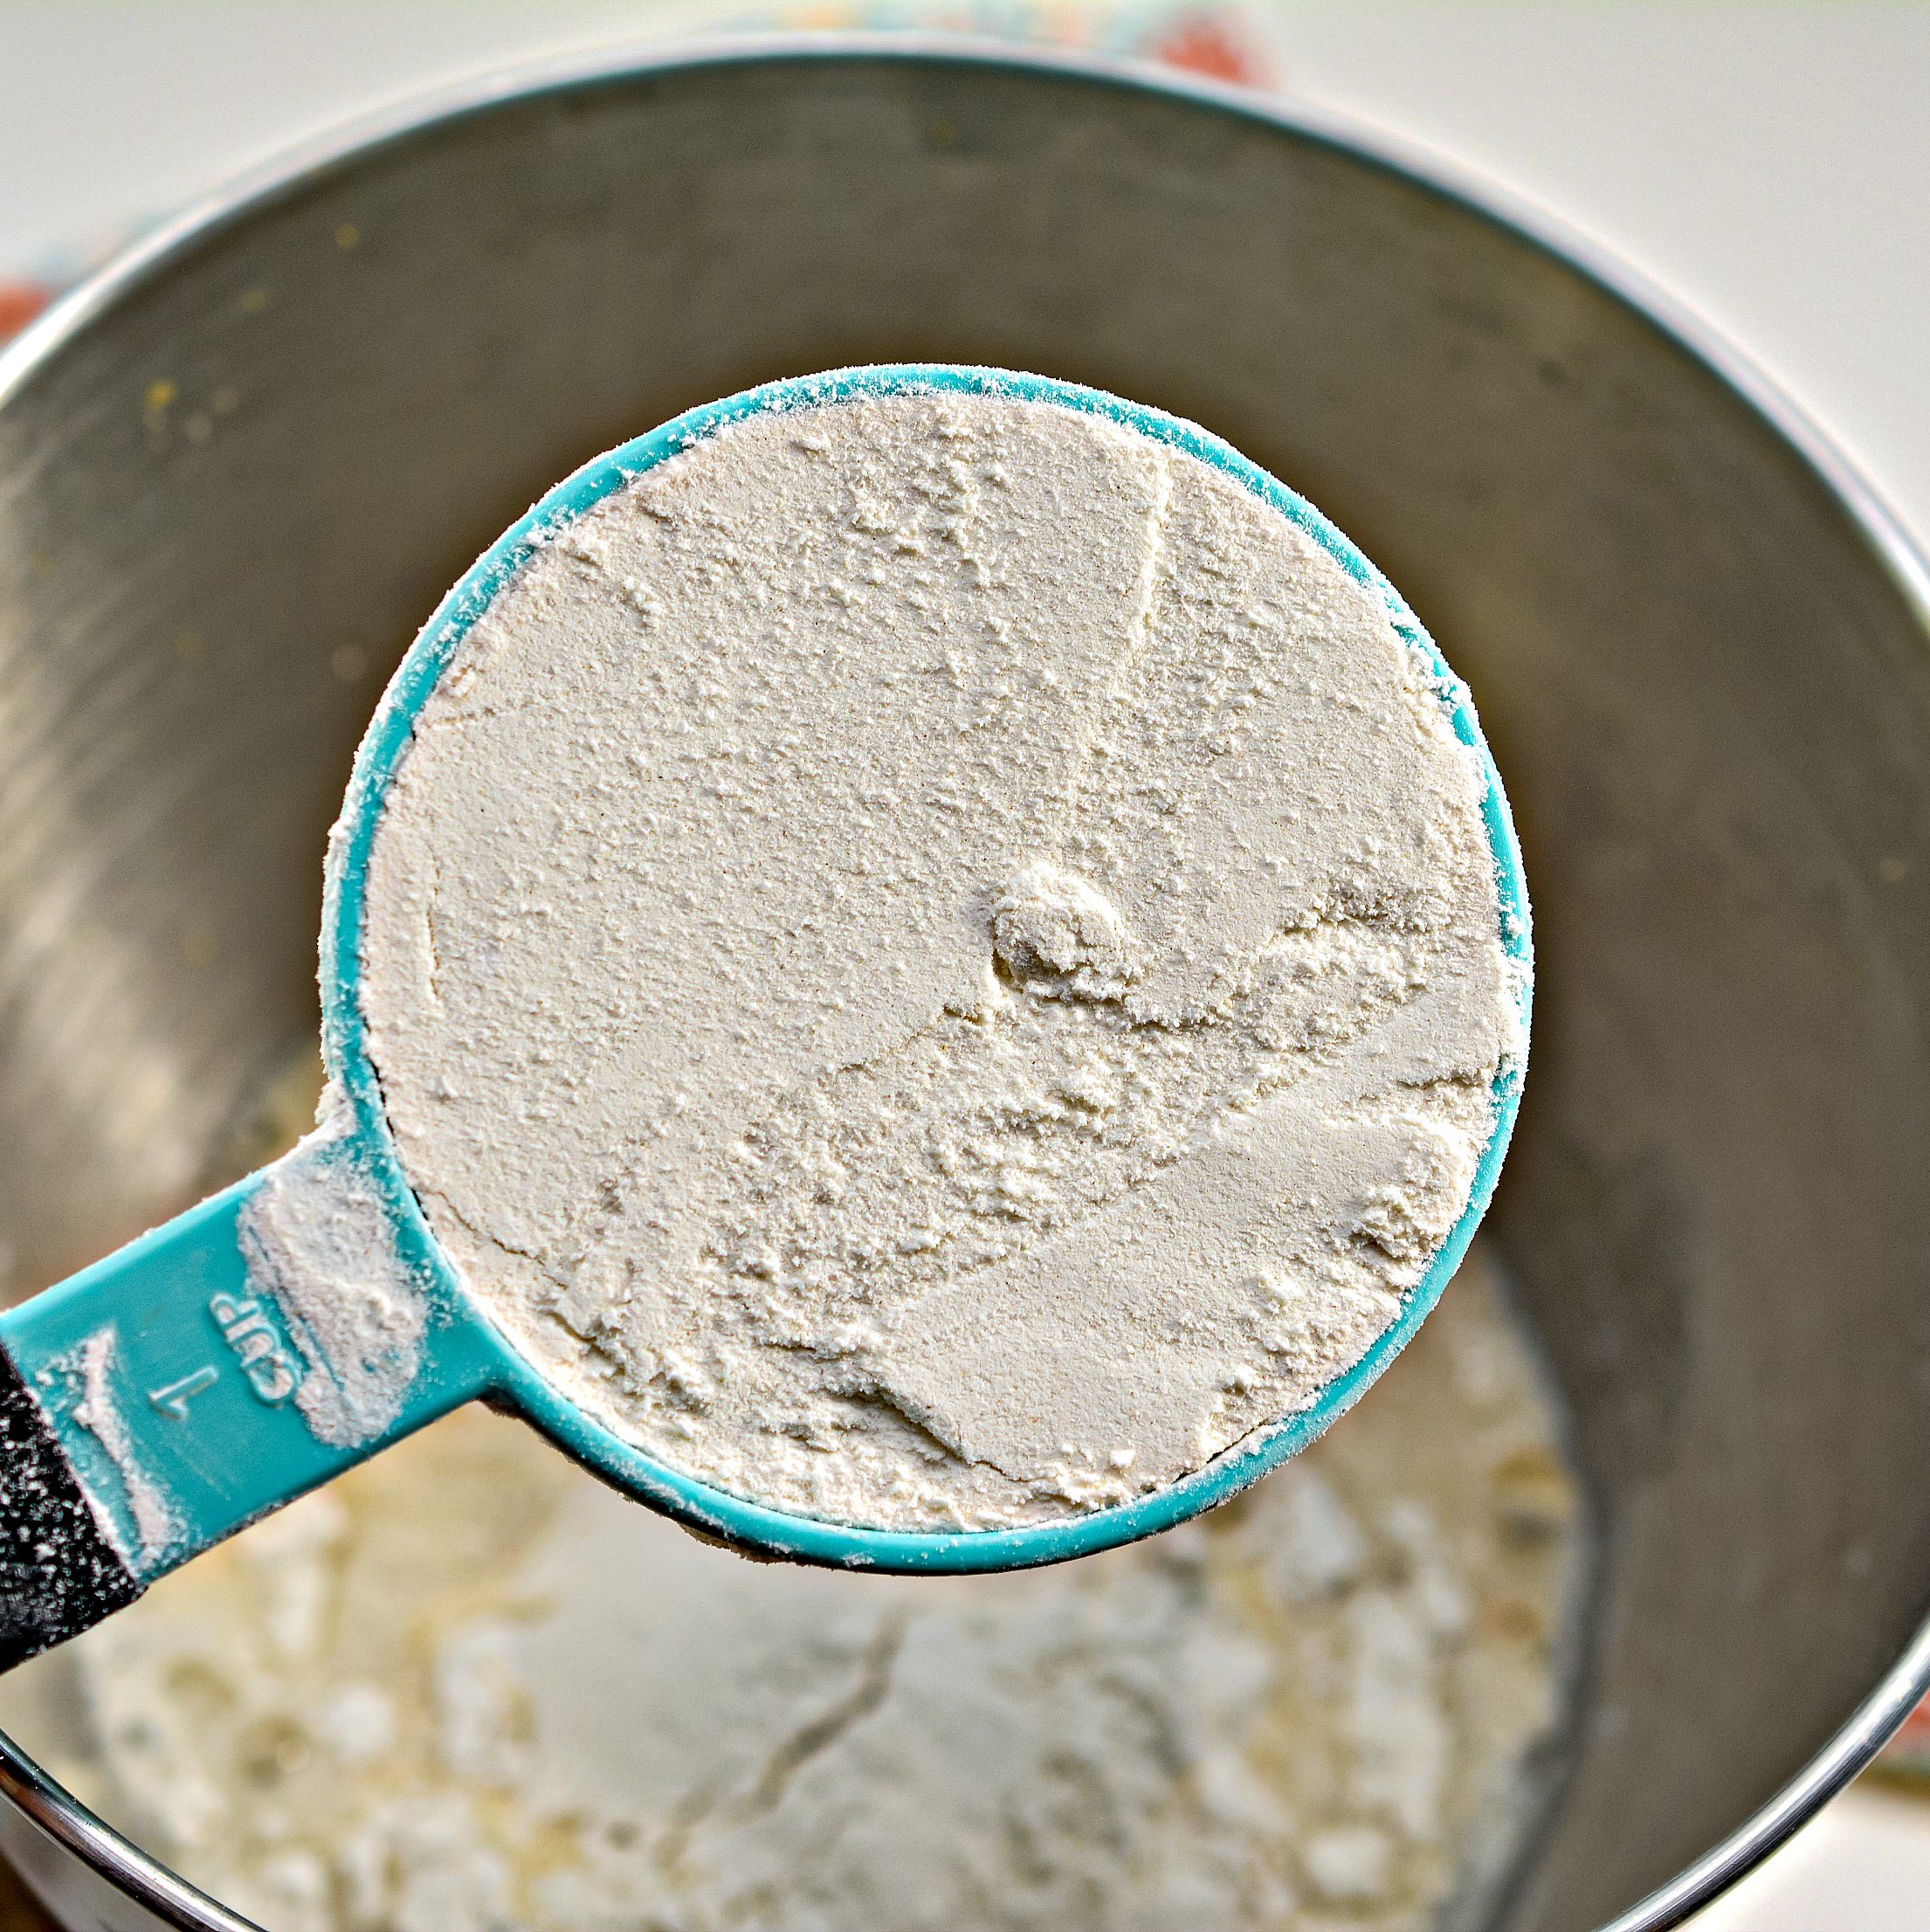 Add 2 cups of flour to the mixing bowl.